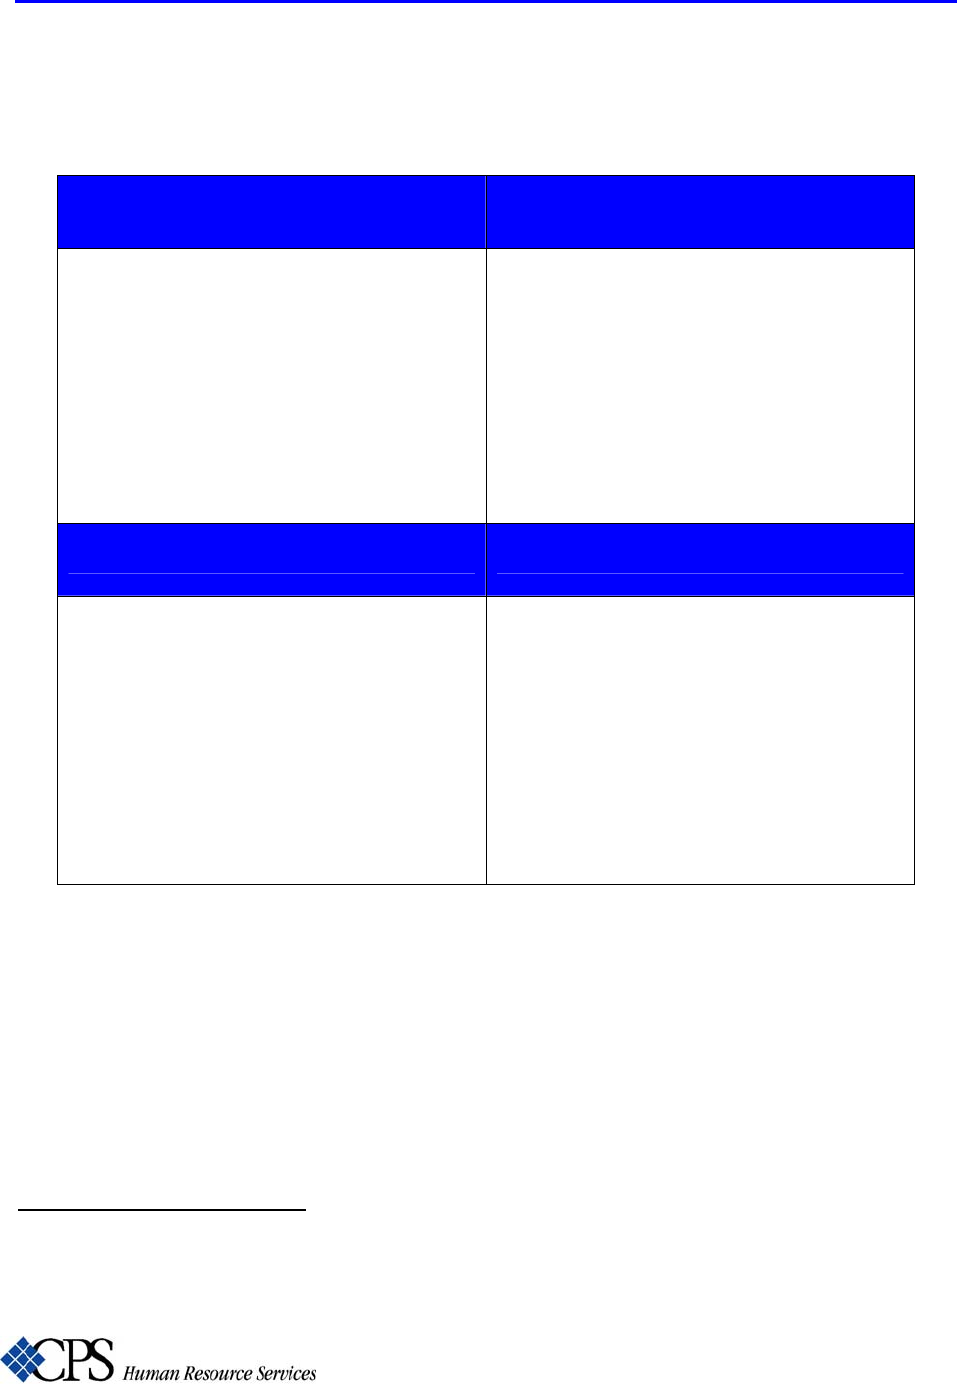 Free Swot Analysis Template - Edit, Fill, Sign Online 